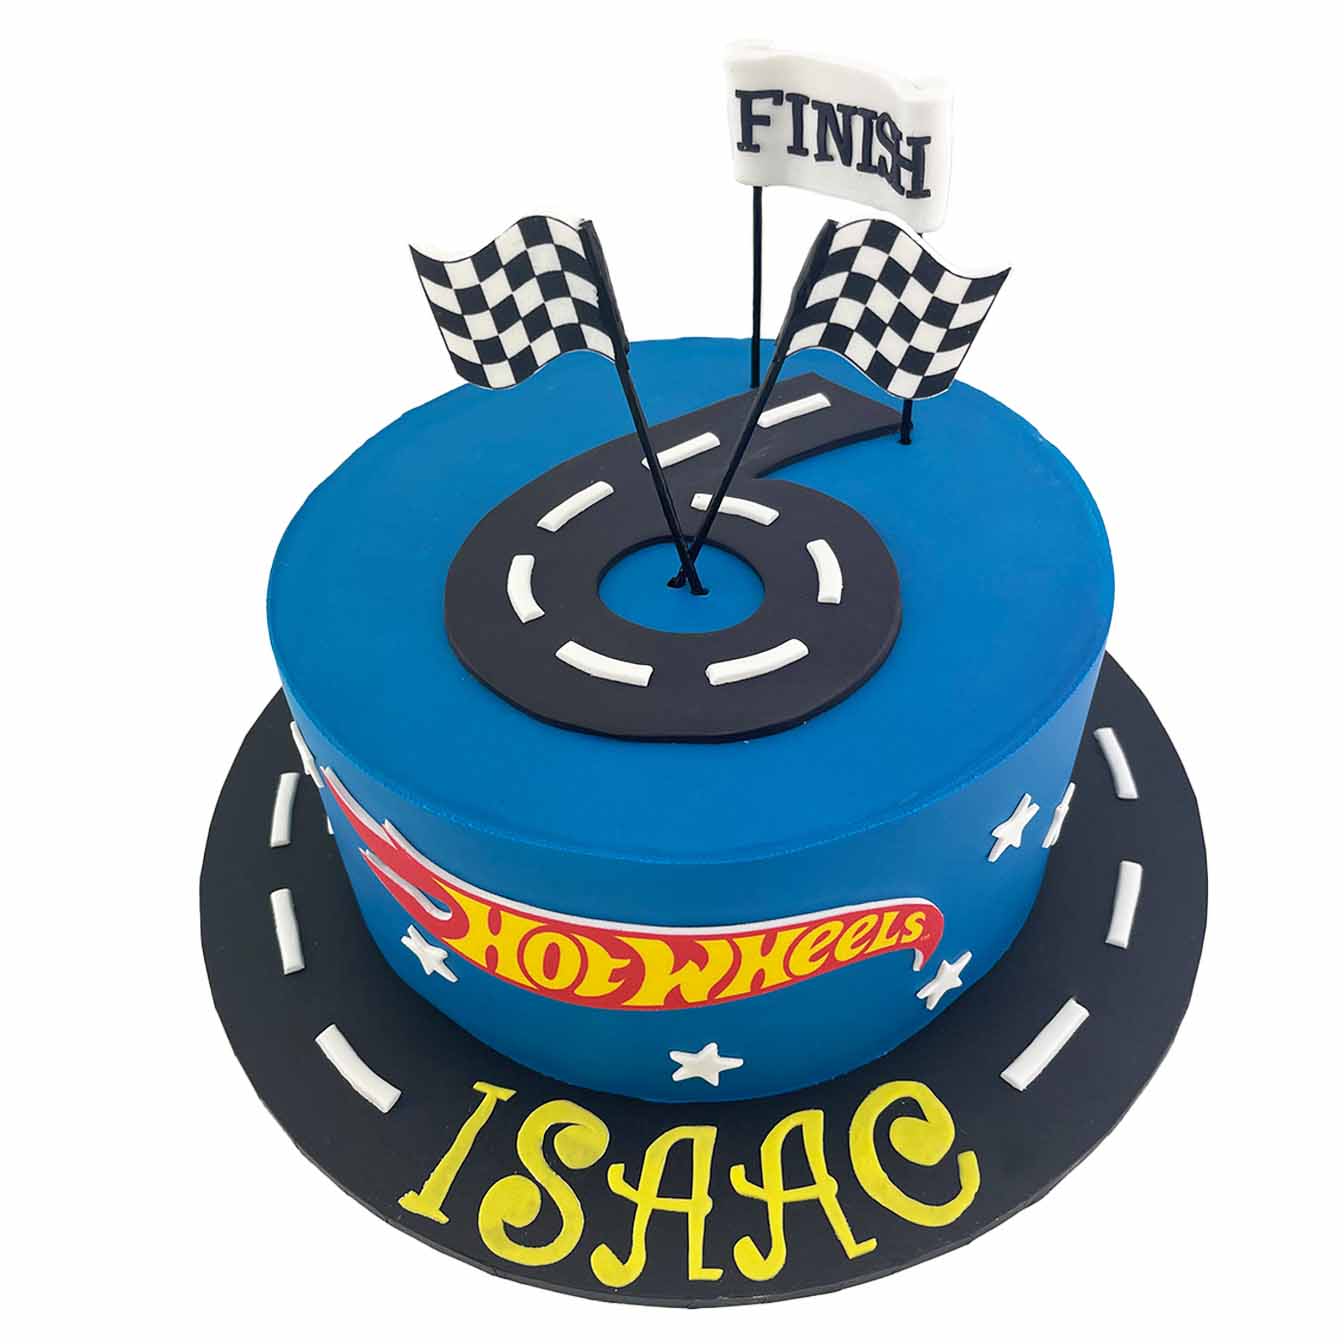 Hot Wheels Speedway Cake - A blue fondant iced cake with an age-themed road track, Hot Wheels logo, and finish line flags, a thrilling centrepiece for racing enthusiasts and birthday parties.